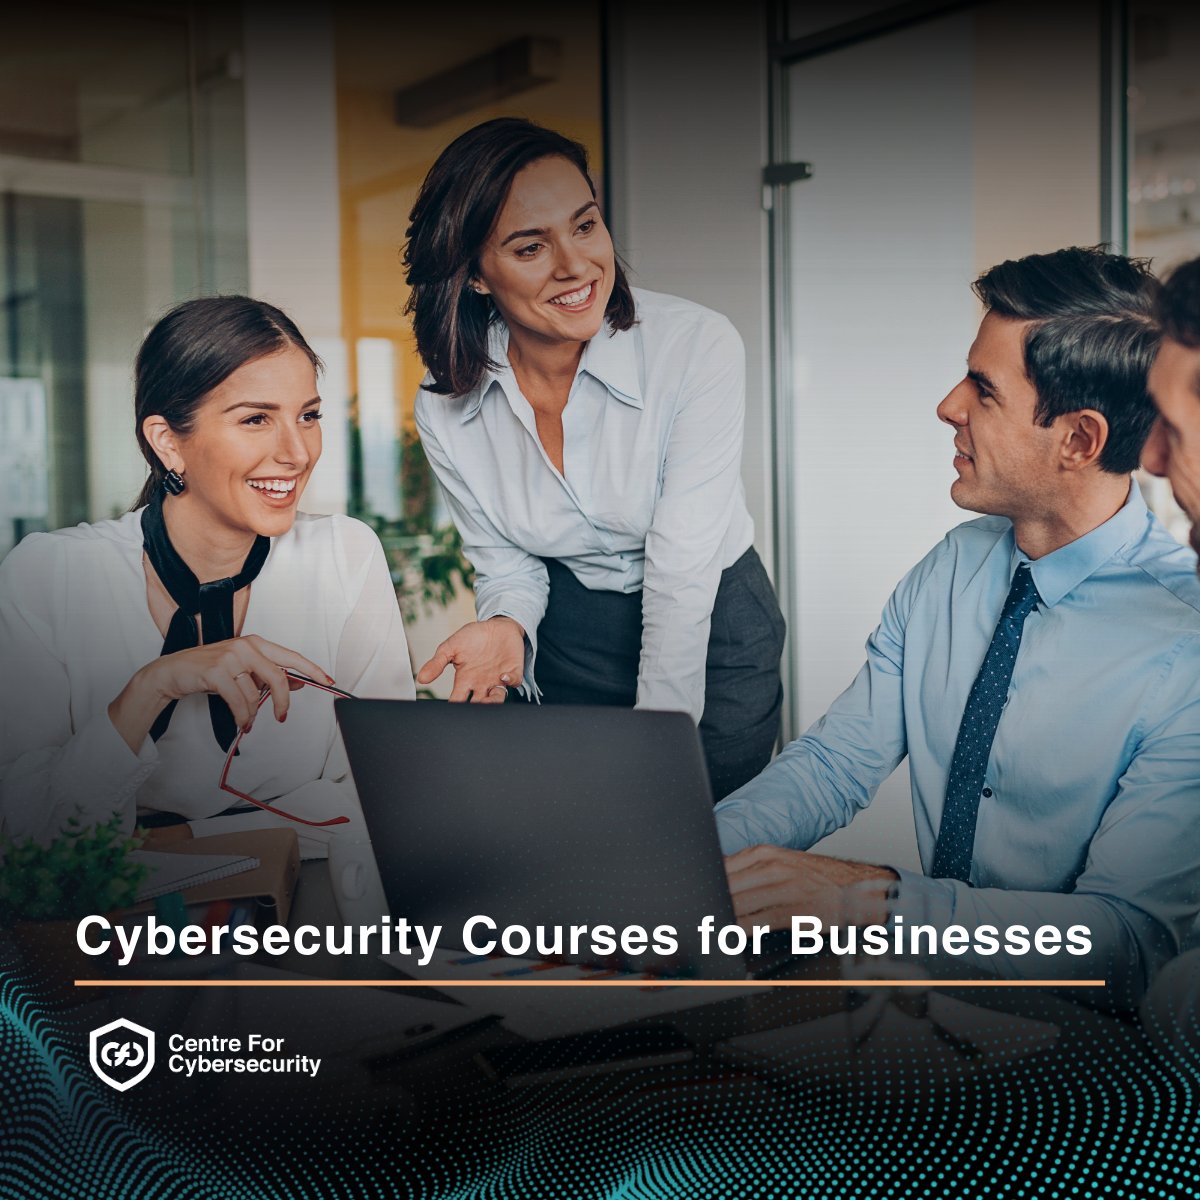 Empower your team with cybersecurity training. 🛡️ 

Discover our courses and get in touch with the Centre For Cybersecurity at hubs.la/Q02yvZPm0

#CybersecurityTraining  #CyberDefense #BusinessSecurity #WorkforceTraining#  #SecurityAwareness #CyberProtection #TechTraining